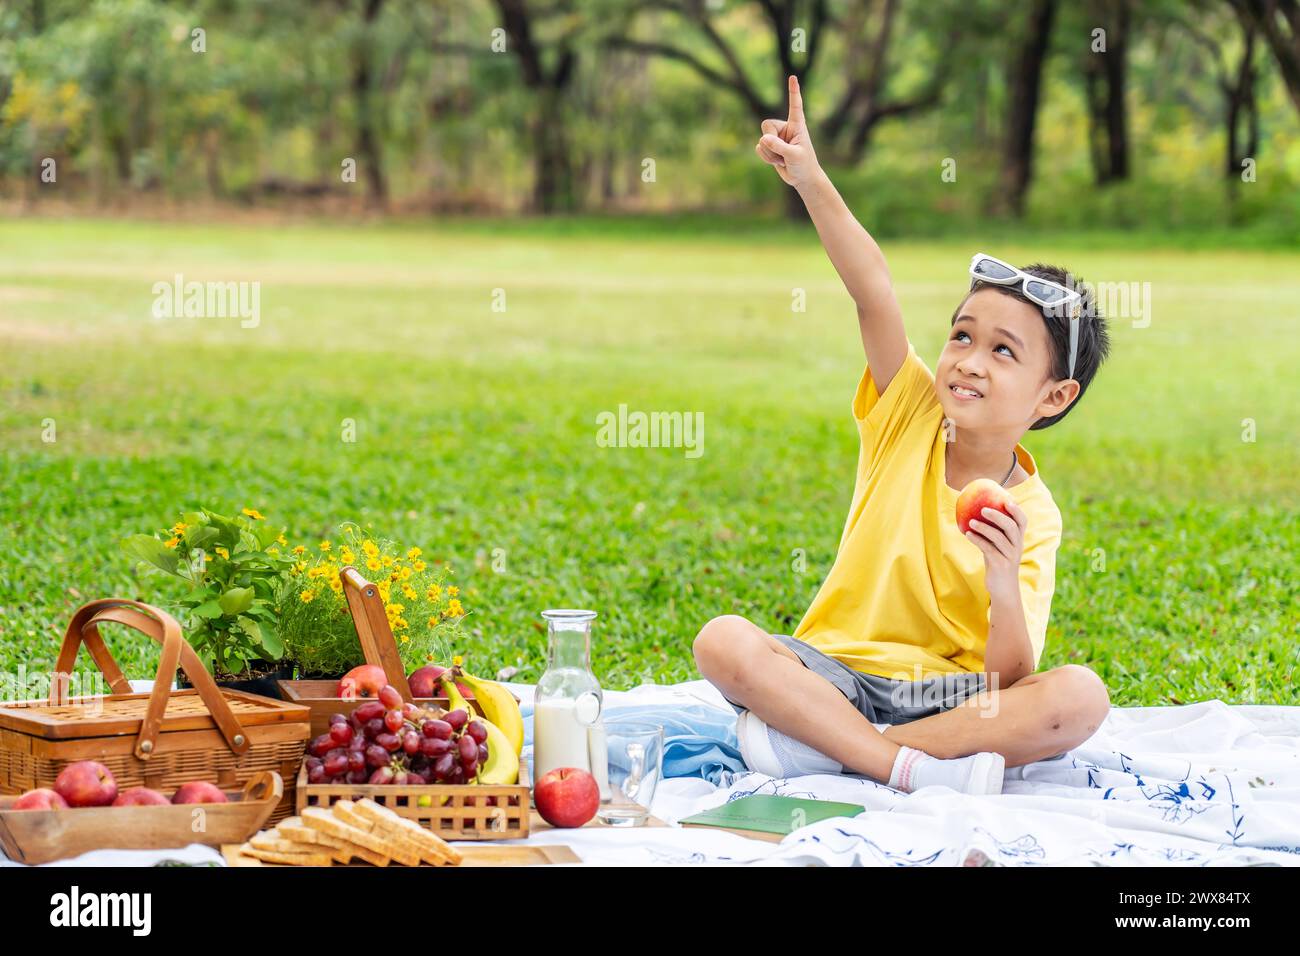 A child sits on a blanket with an apple and a bottle of milk Stock Photo